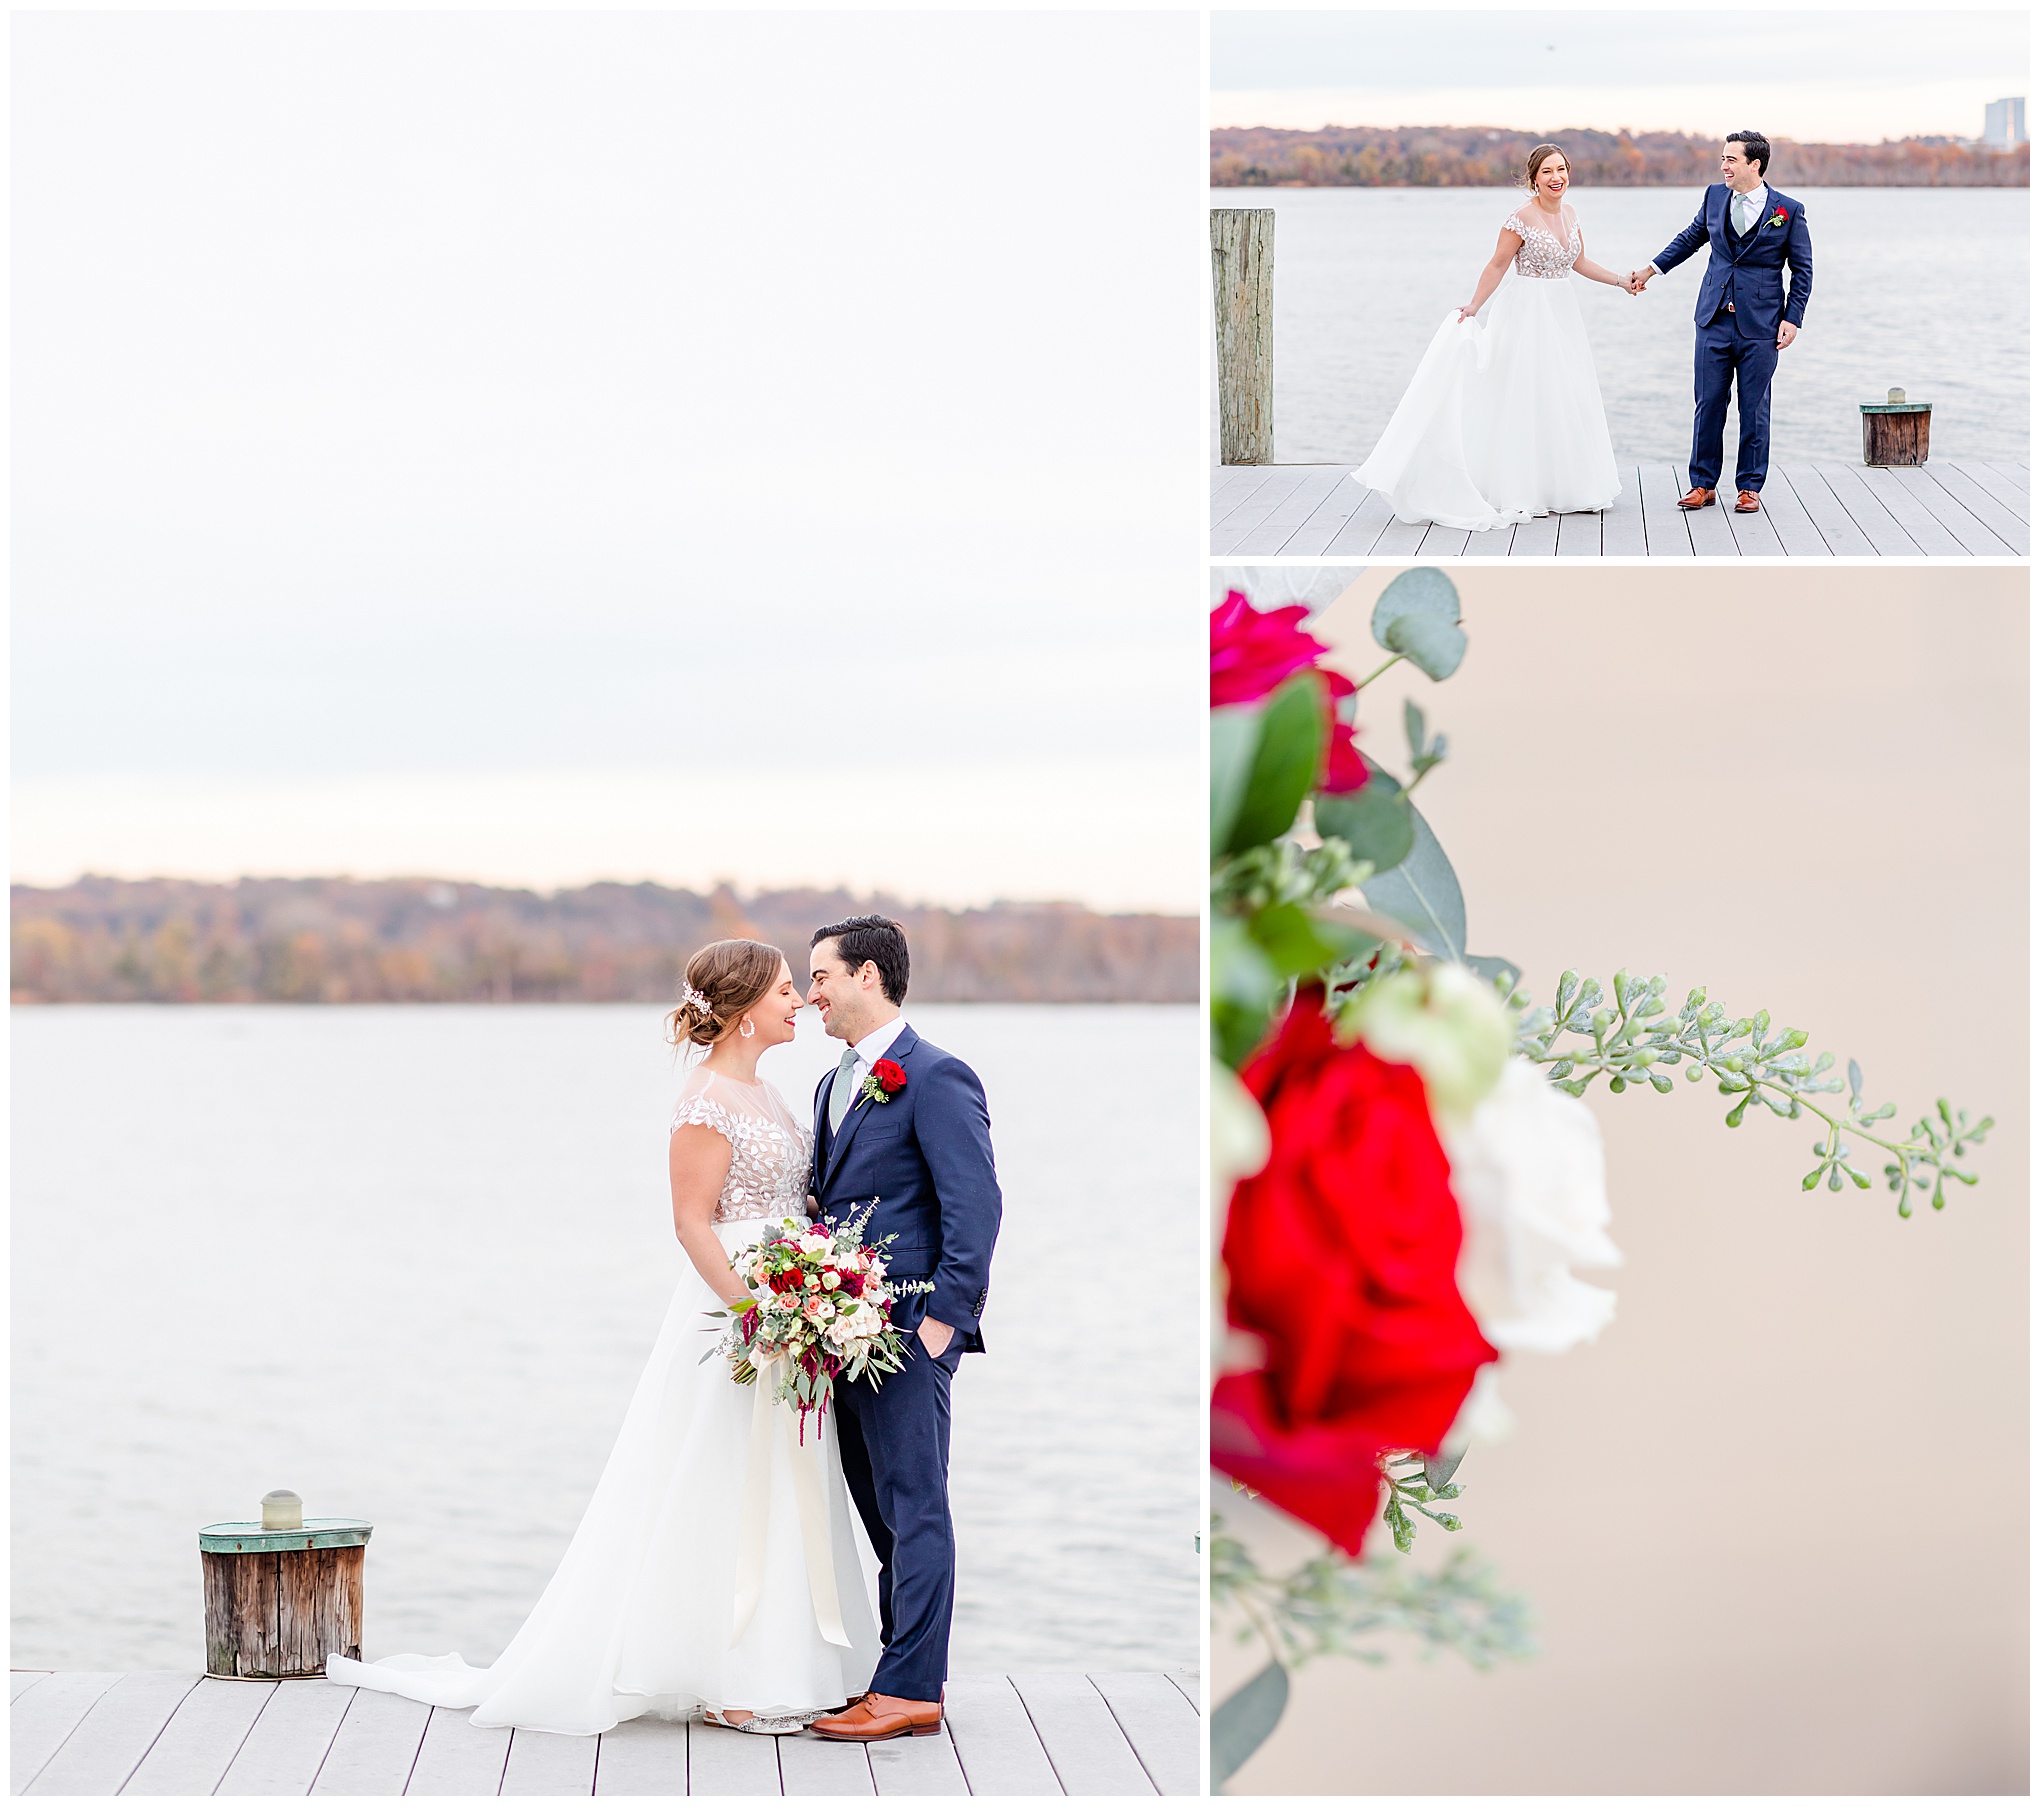 Lorien Alexandria winter wedding, Old Town Alexandria wedding, Alexandria Virginia wedding, DC micro wedding, northern Virginia wedding photographer, Alexandria Virginia wedding photographer, DC wedding photographer, winter wedding aesthetic, Rachel E.H. Photography, bride and groom almost kissing on dock, bride and groom slow dancing on dock